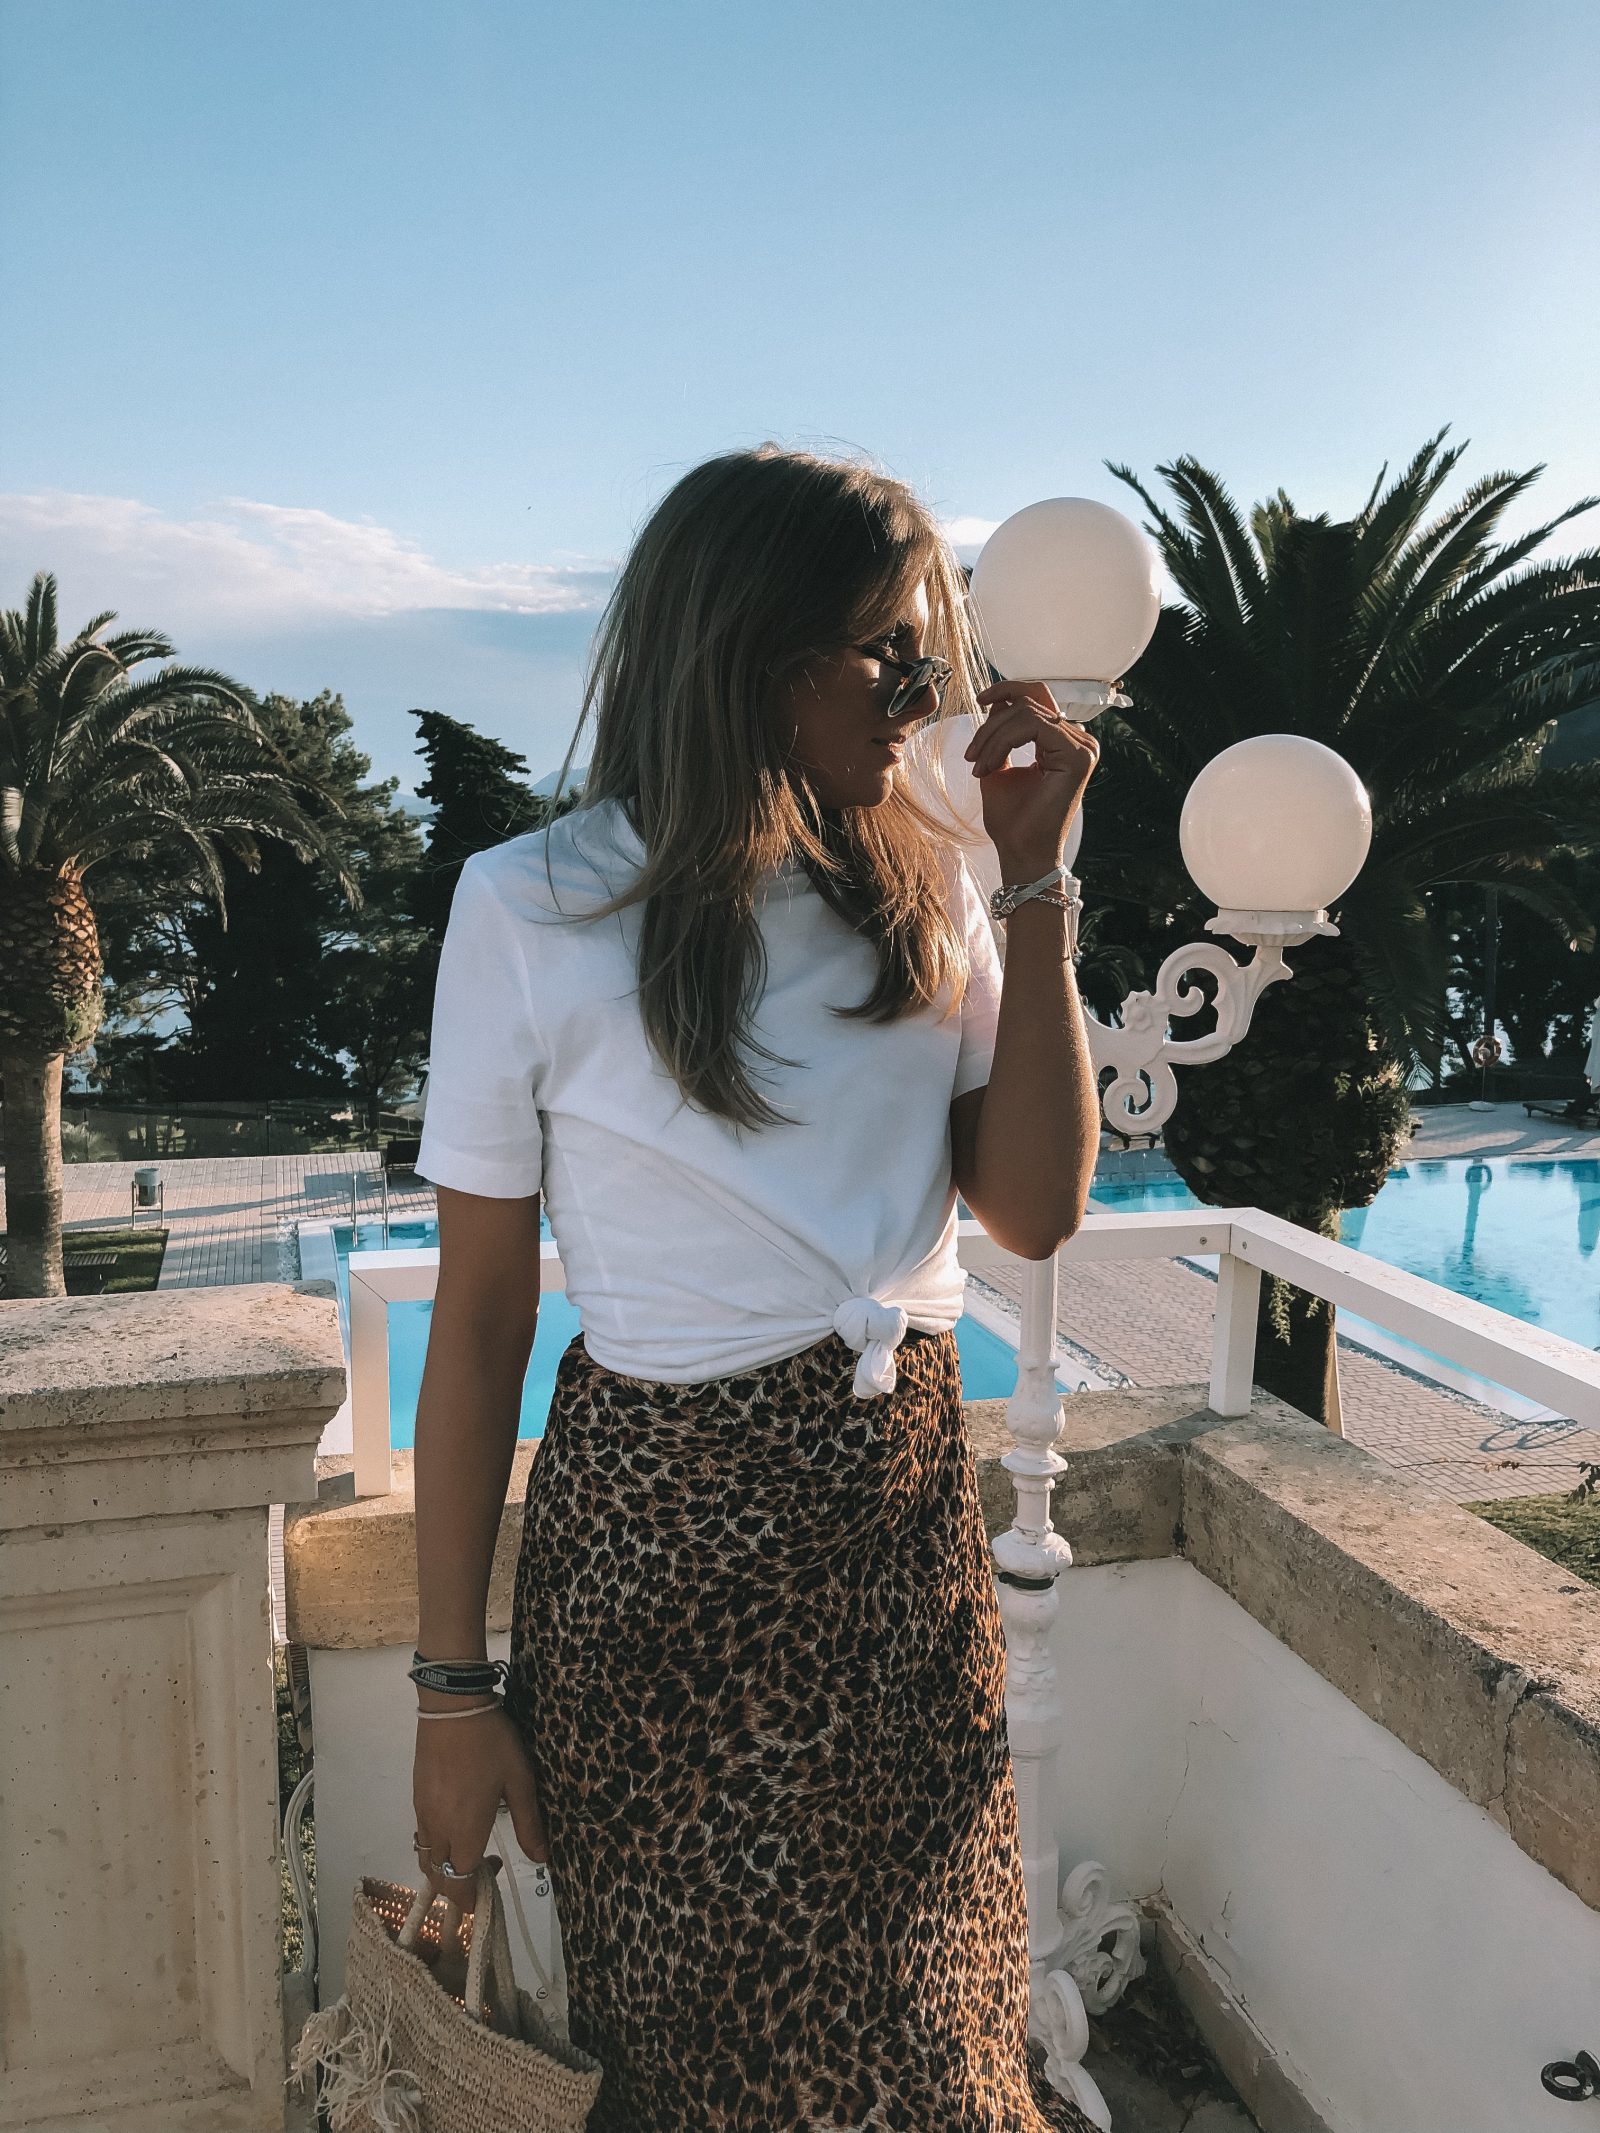 Leopard Print Midi Skirt - Holiday Outfit Idea in Mallorca - Royal Hideaway Hotel Formentor